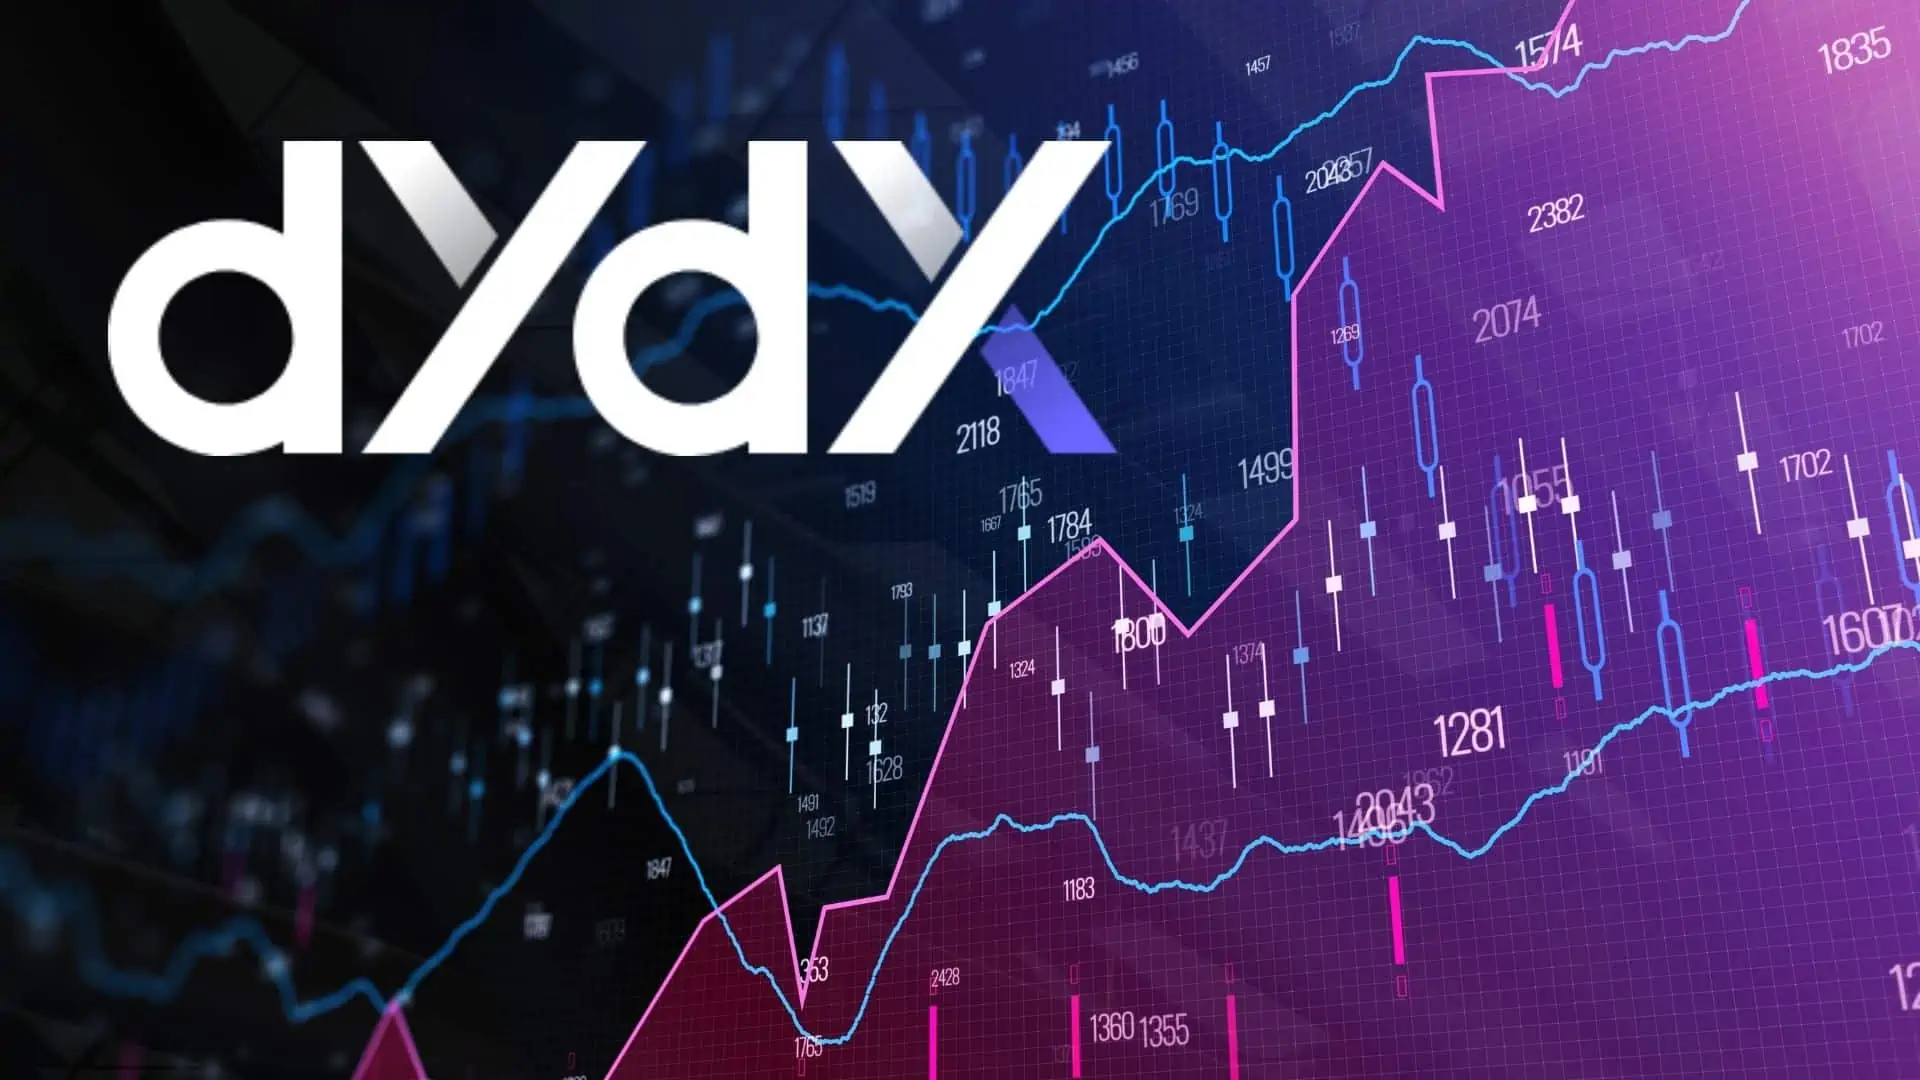 dYdX Community Greenlights Staking 20M DYDX tokens to Boost Security